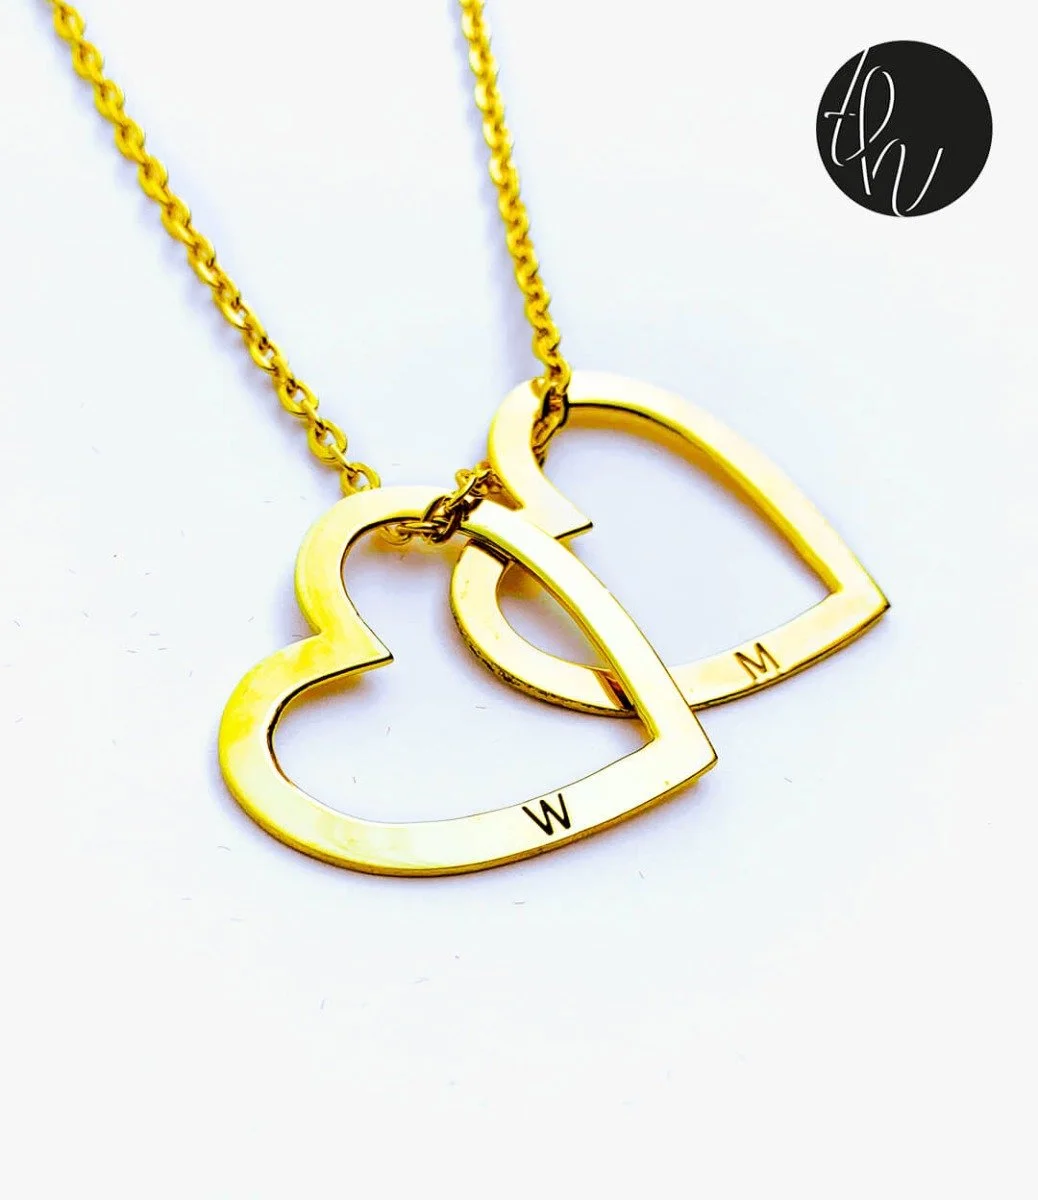 Heart-shaped pendant with Engraved Letters